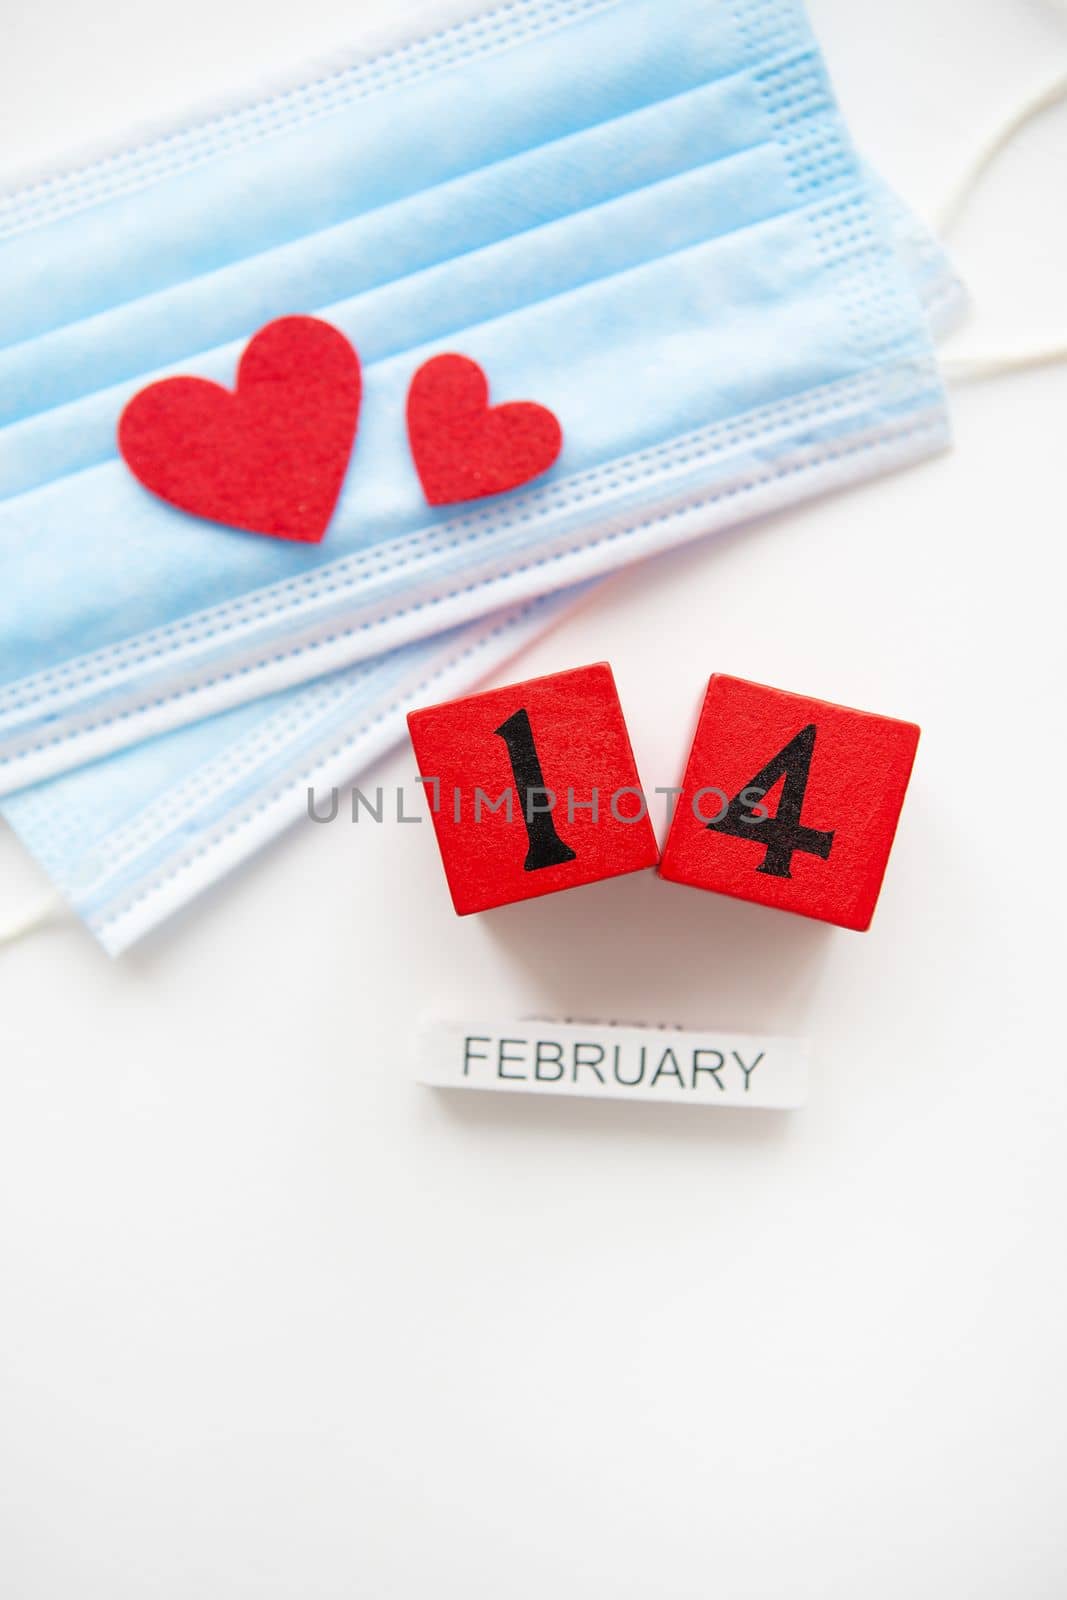 Valentine's Day celebration concept. Wooden cubes on February 14th. The heart lies on medical masks, the fight against coronavirus